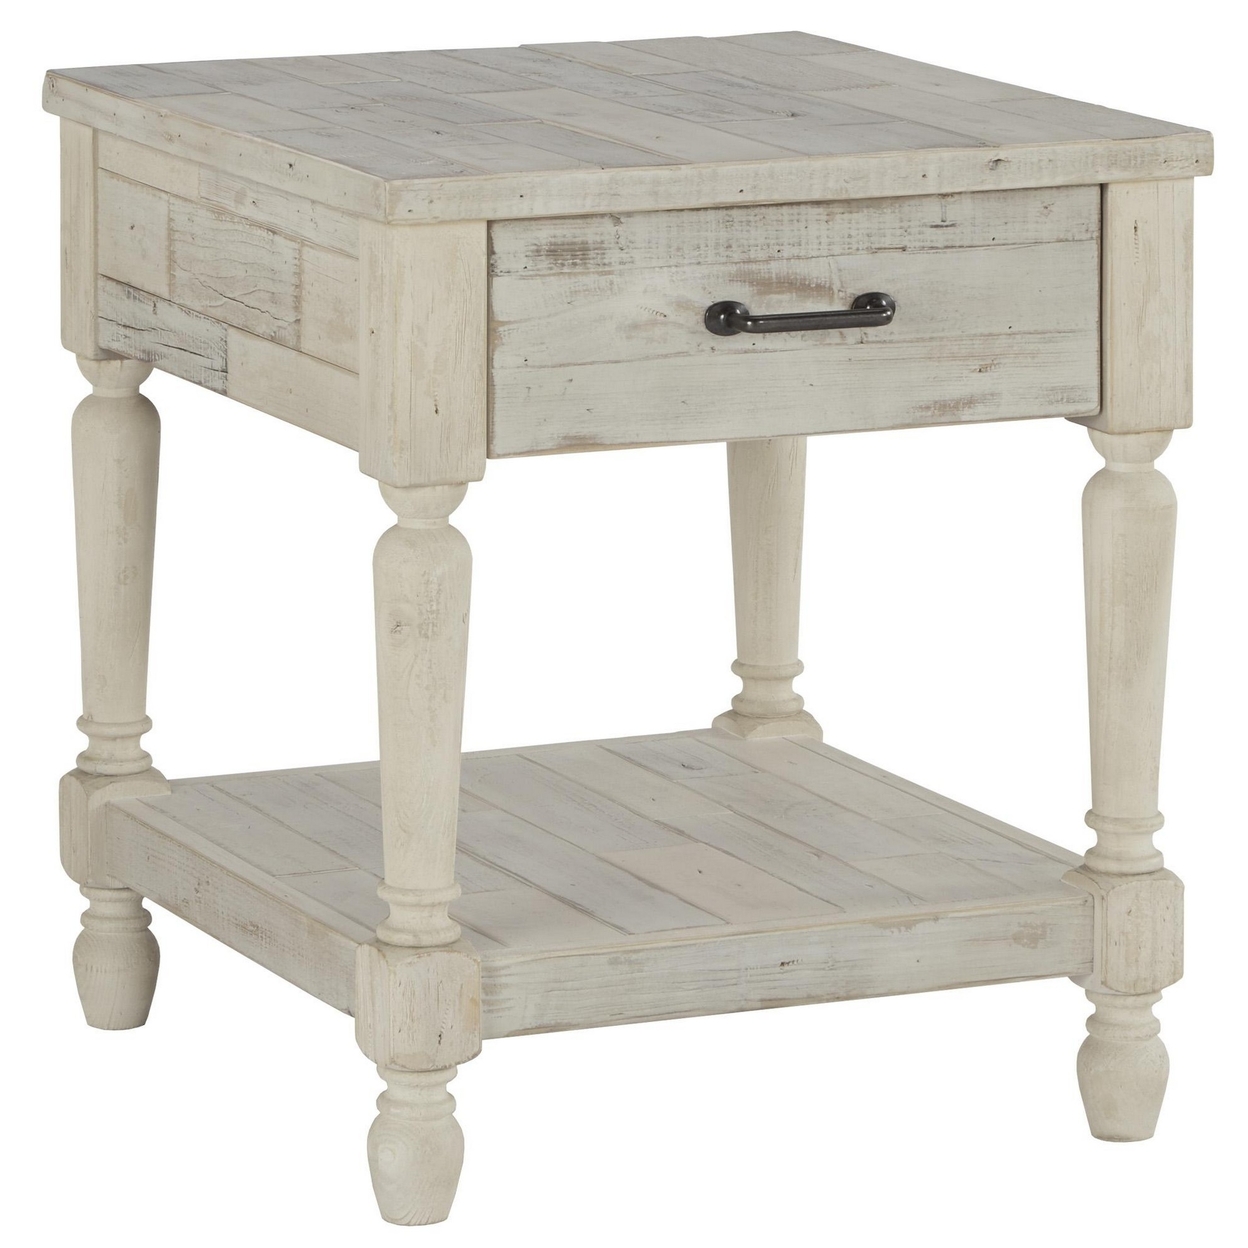 Plank Style End Table With 1 Drawer And Open Bottom Shelf, Washed White- Saltoro Sherpi